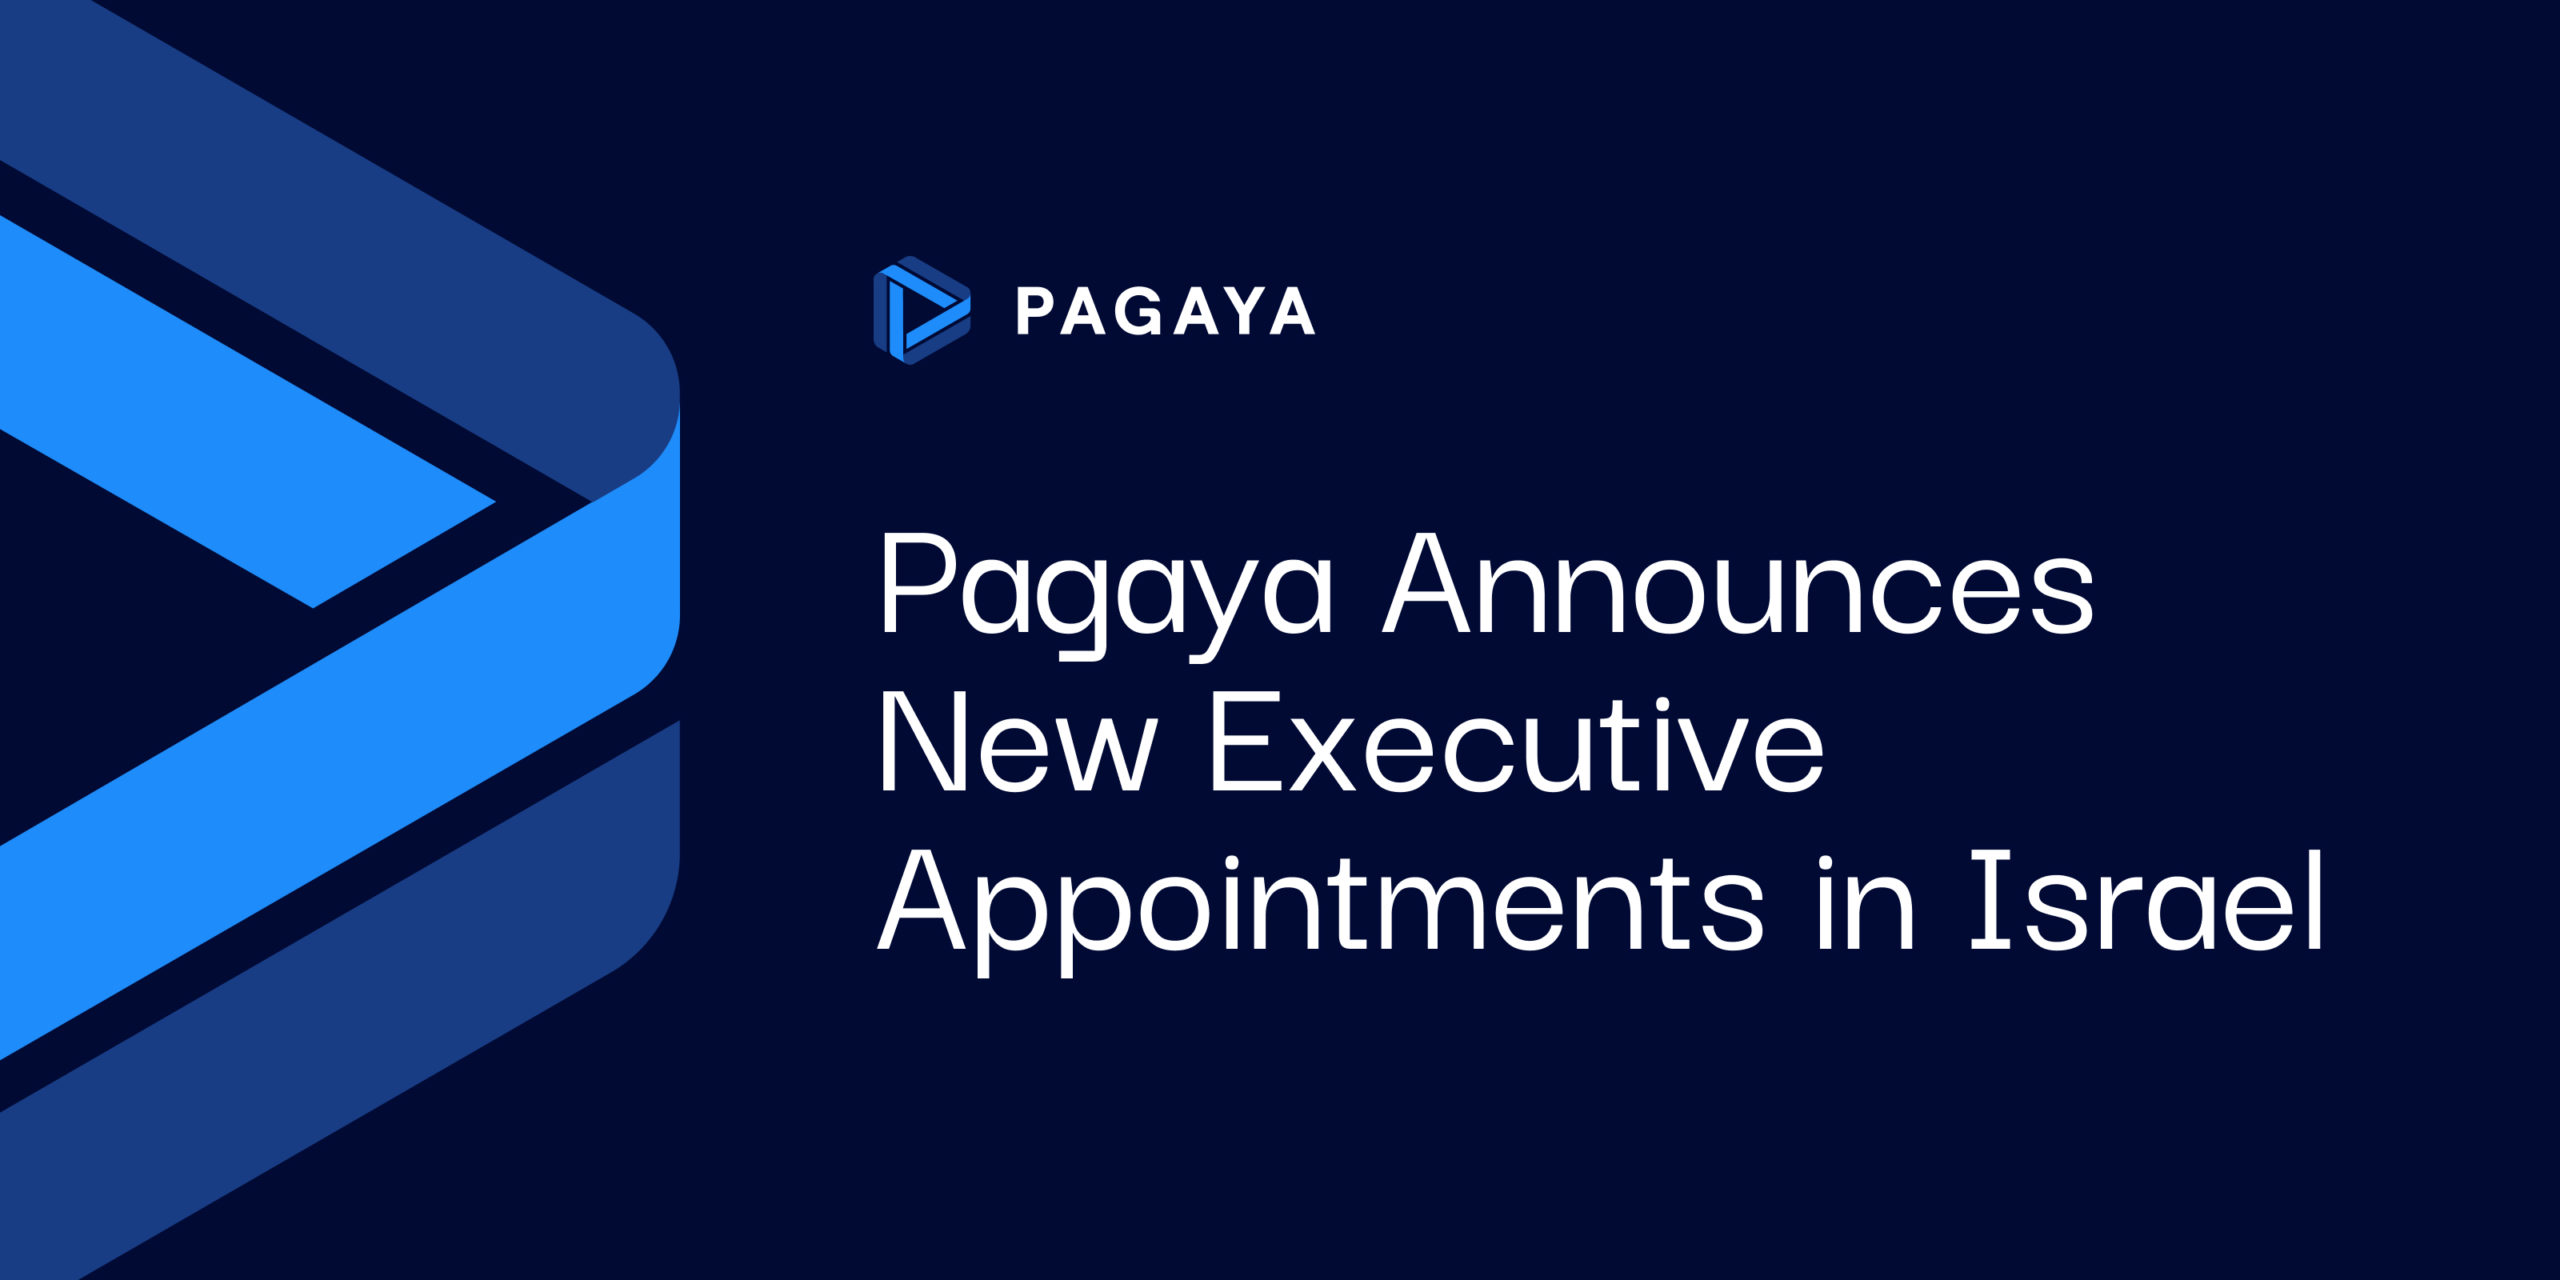 Pagaya Announces New Executive Appointments in Israel